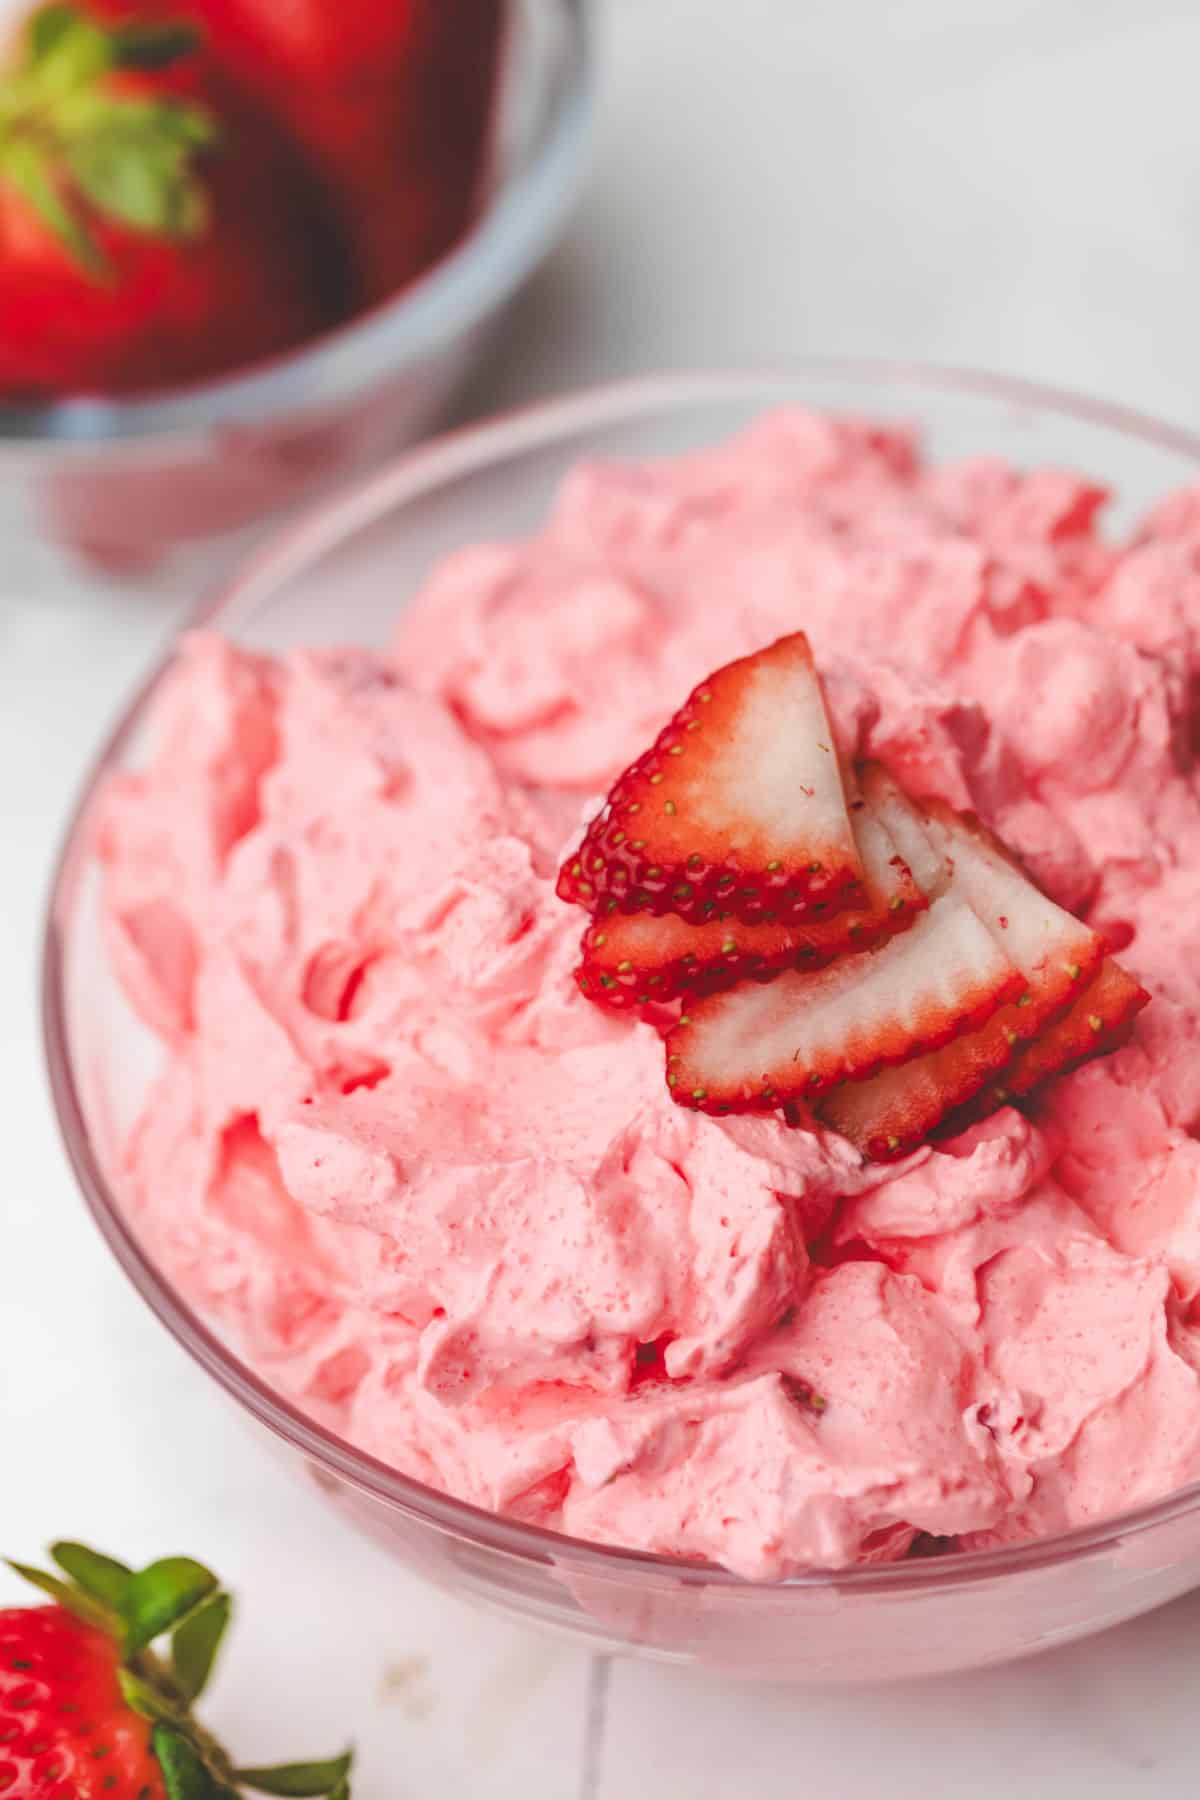 A bowl of strawberry fluff topped with sliced fresh strawberries.